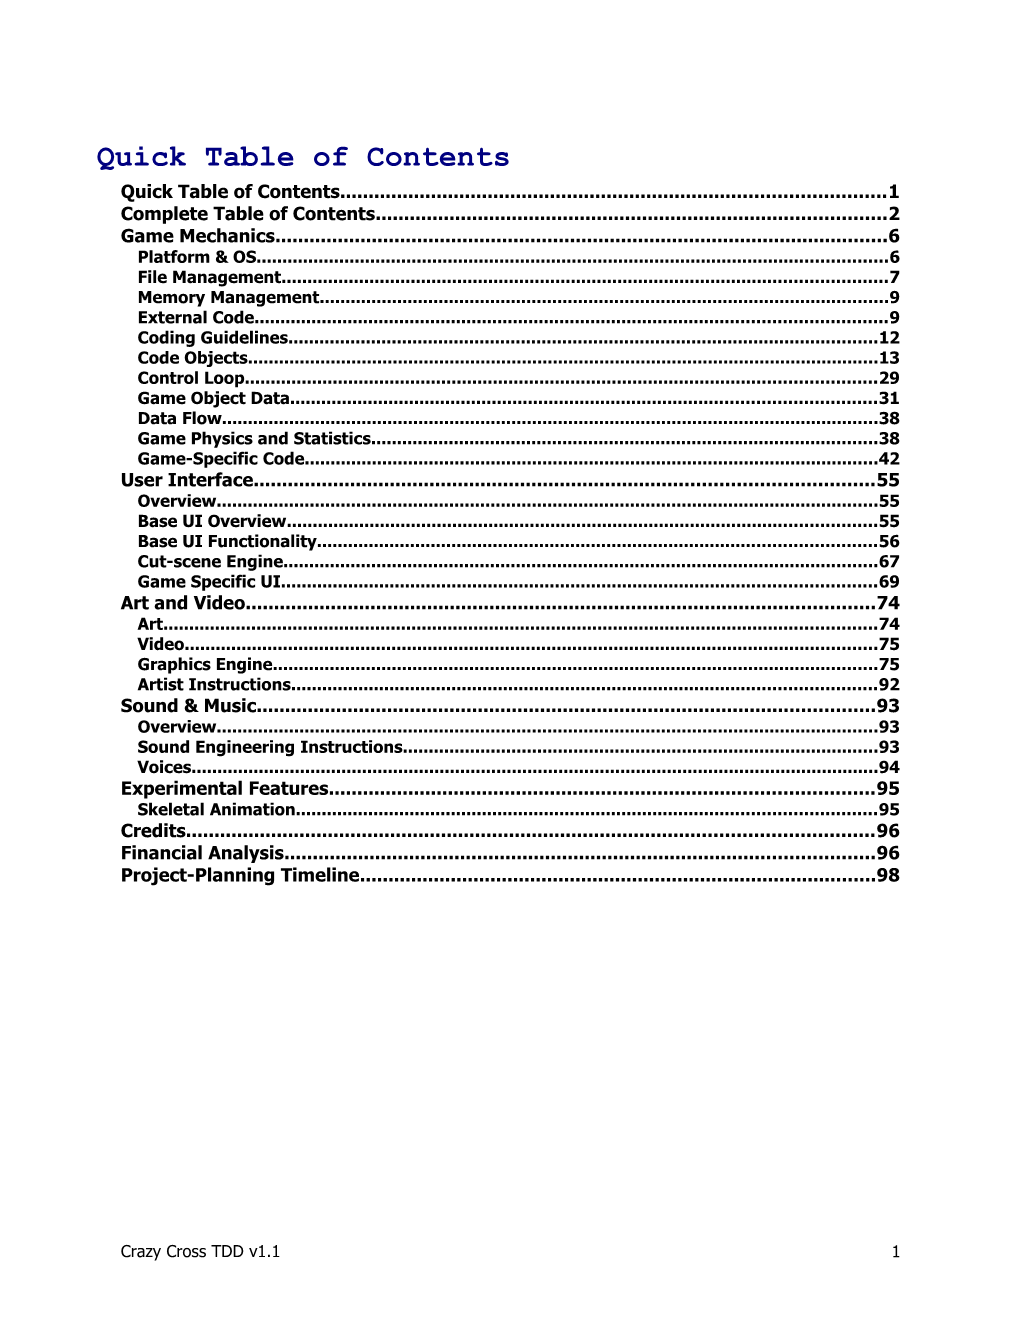 Quick Table of Contents